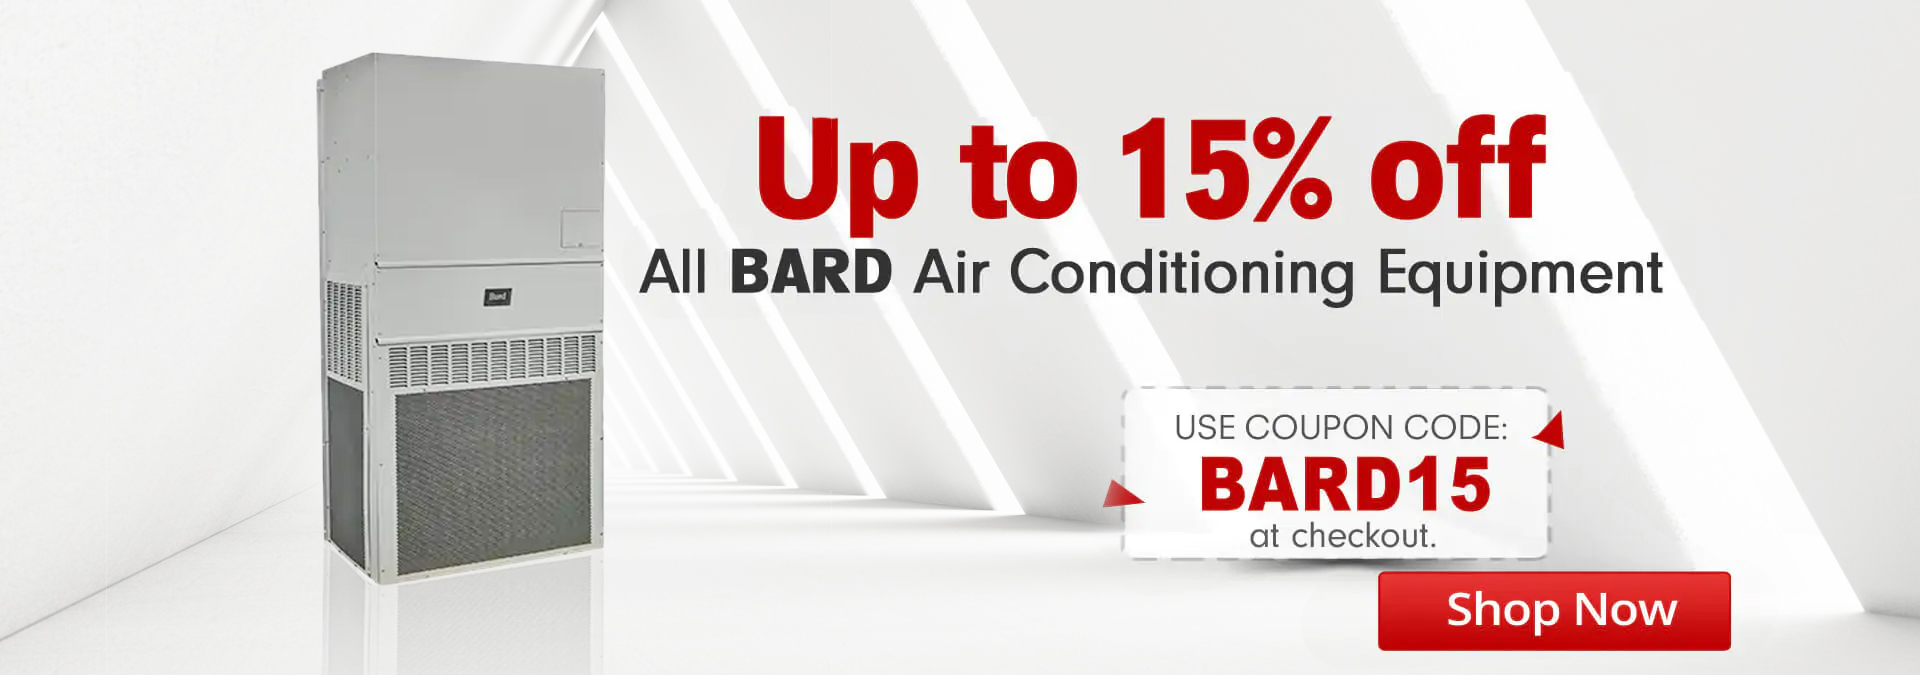 Save Up to 15% On Bard Systems